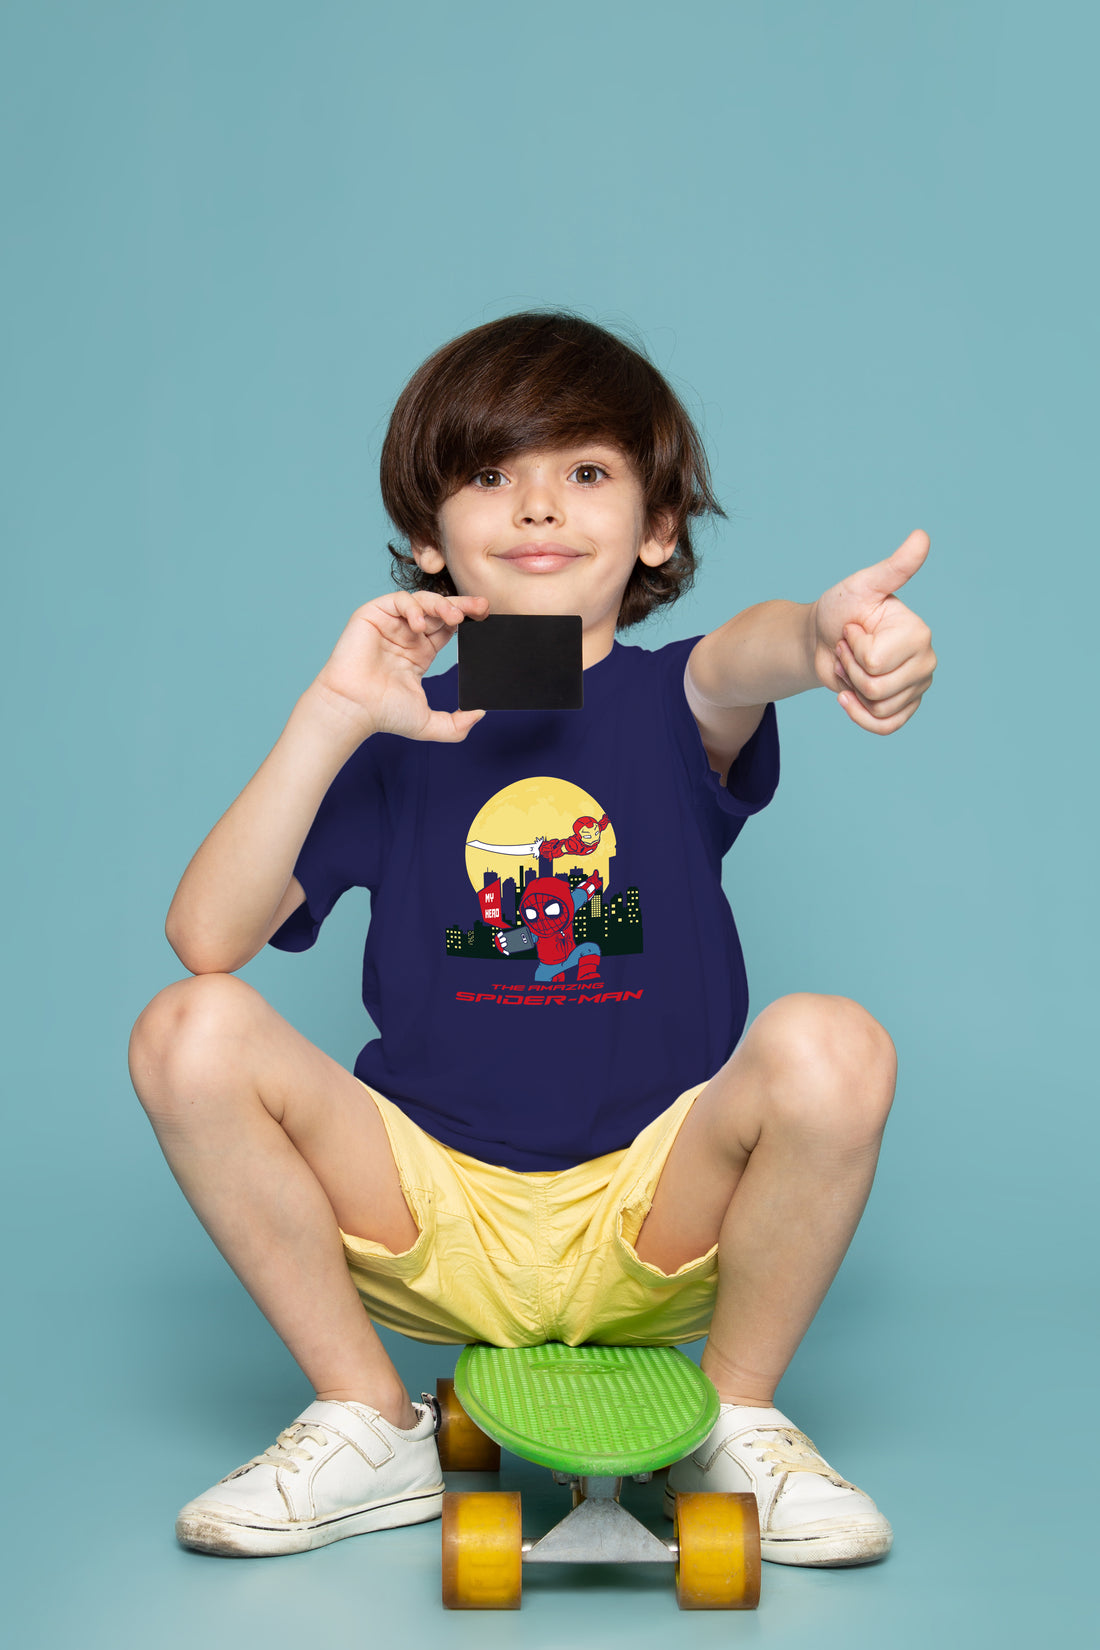 The Amazing Spider-Man - Graphic Pure Cotton Navy T-Shirt for Kids - Regular Fit Comfort